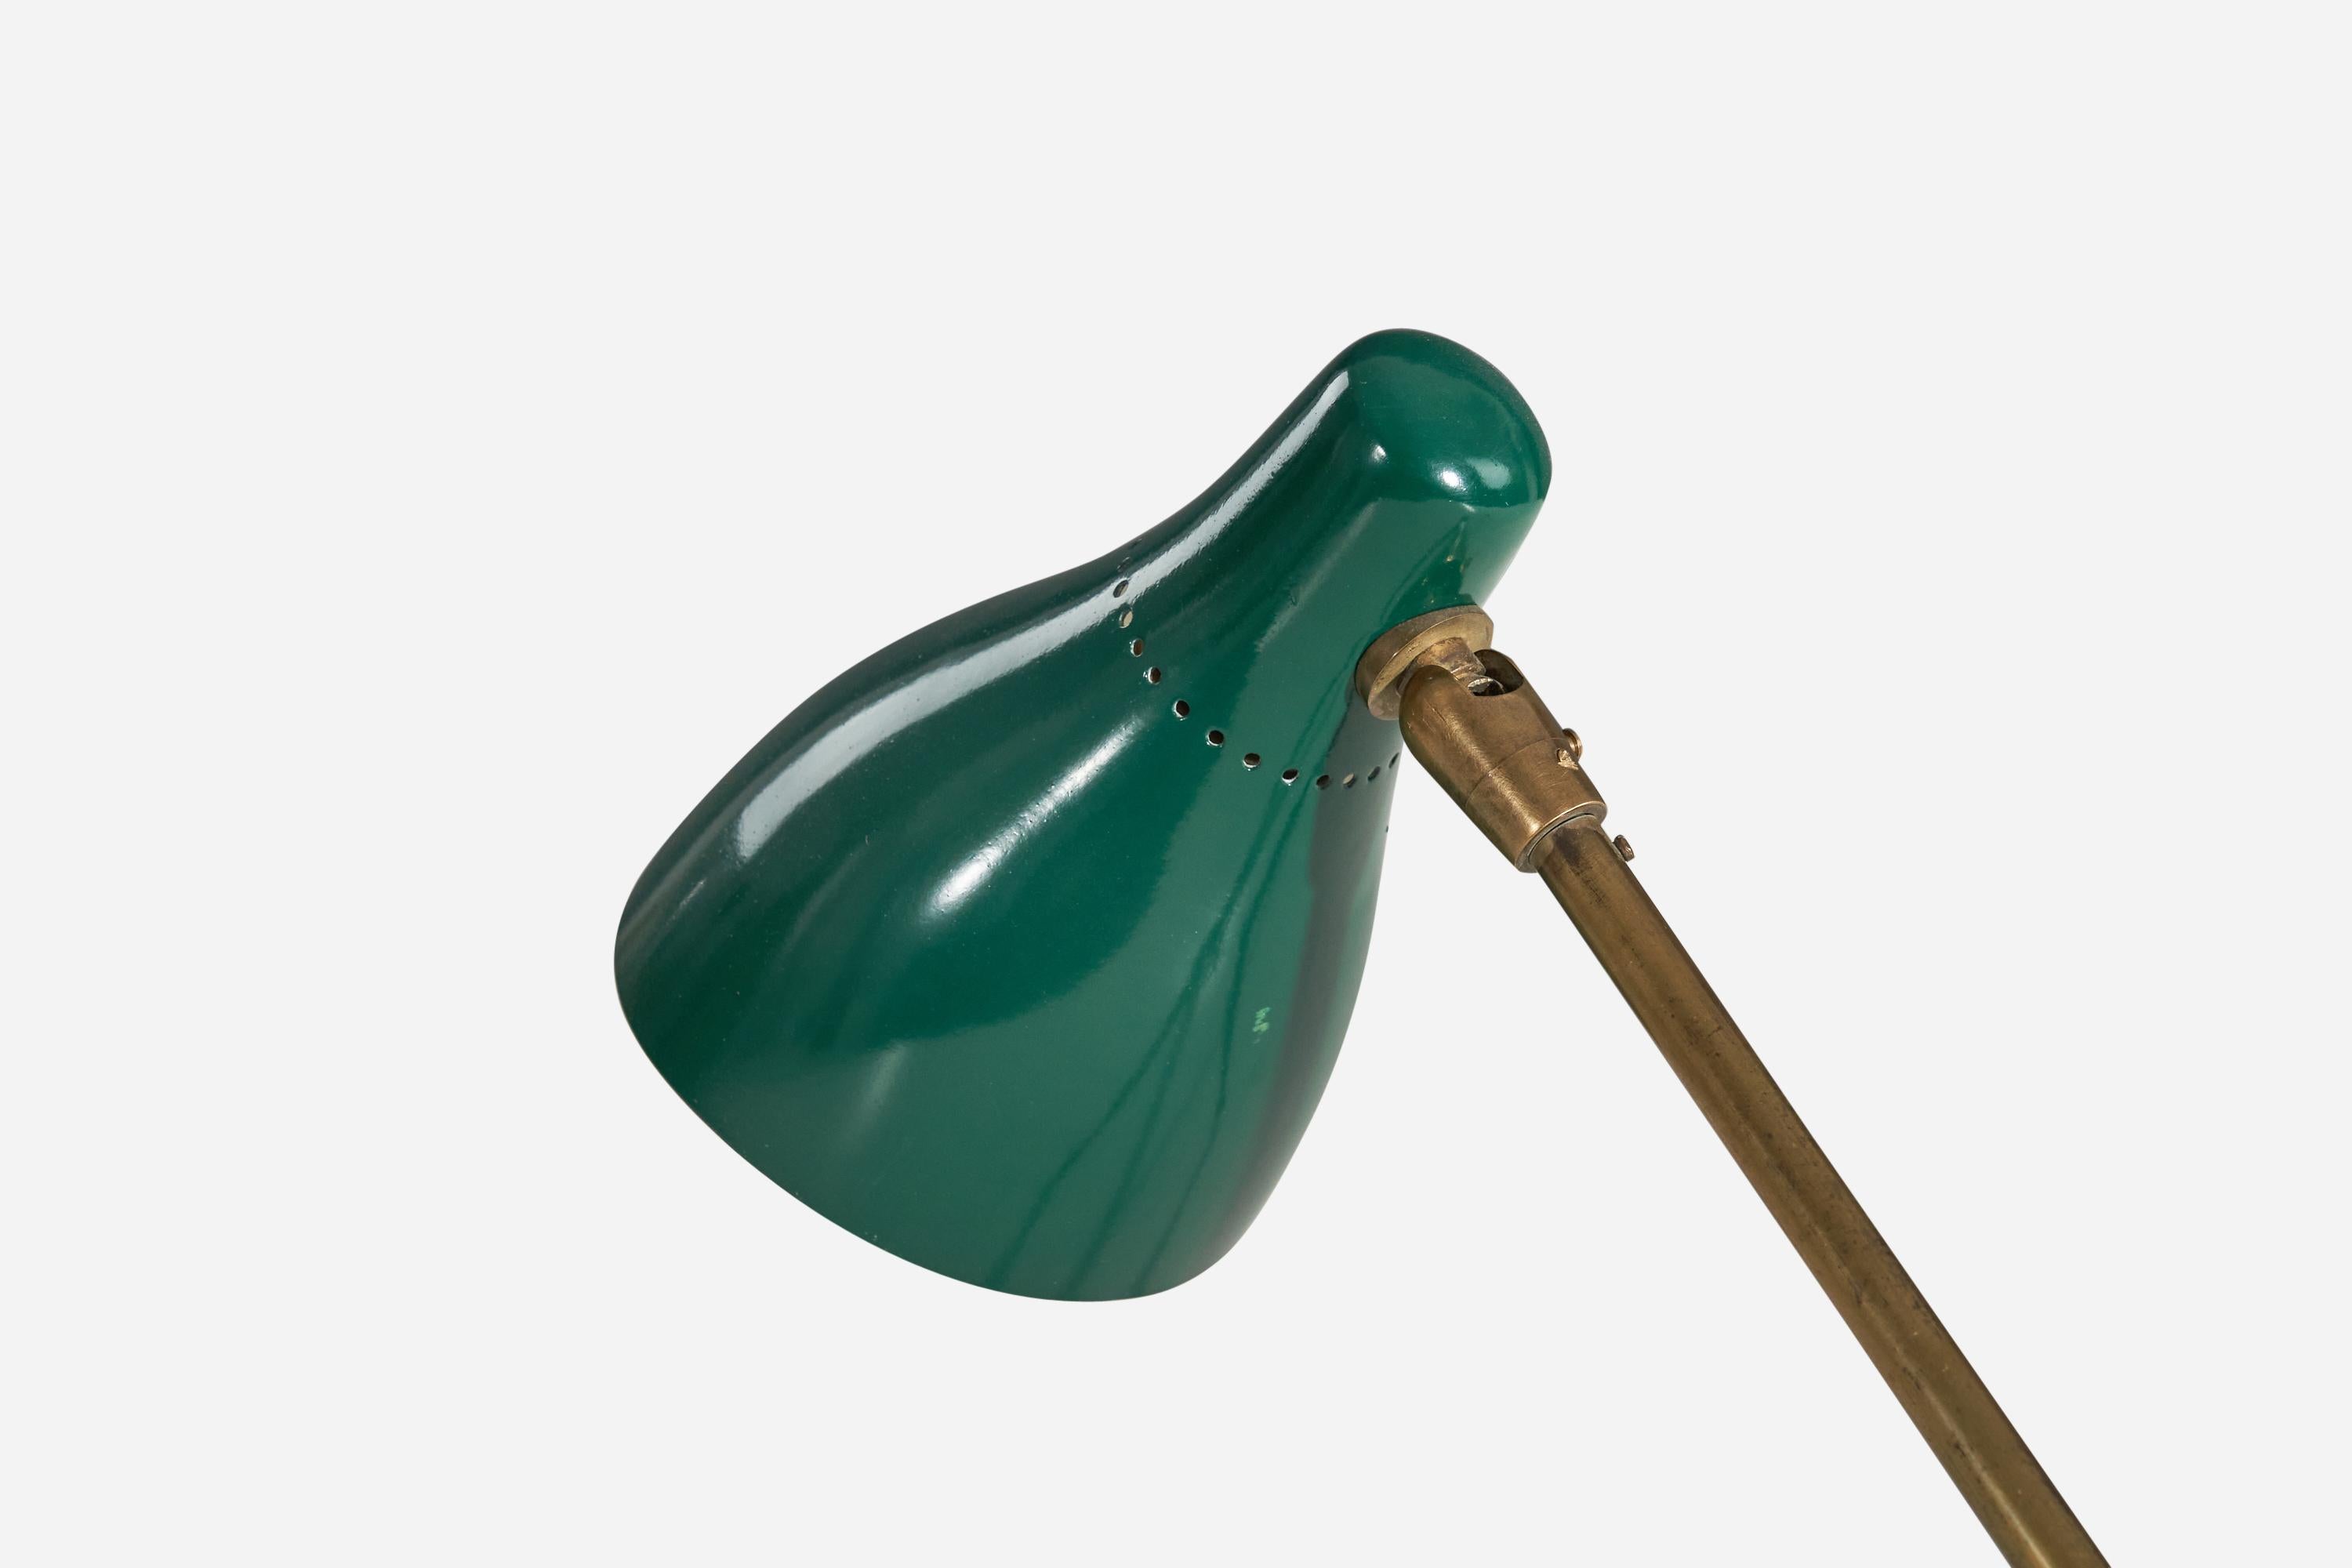 Mid-Century Modern Giuseppe Ostuni, Table Lamp, Brass, Green-Lacquered Metal, O-Luce, Italy, 1950s For Sale